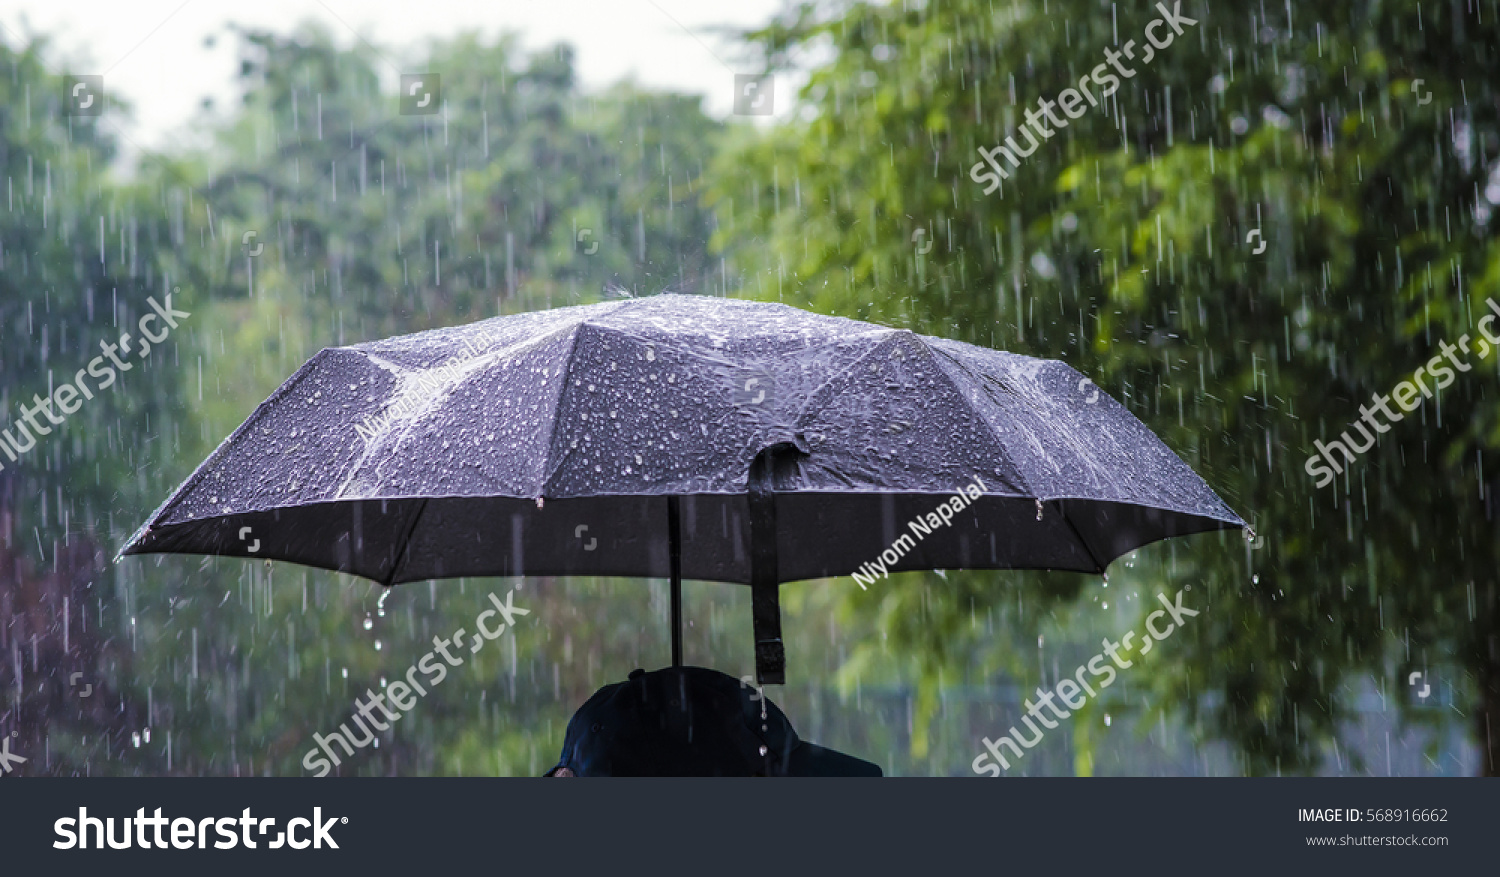 A person with an umbrella in the rain. #568916662